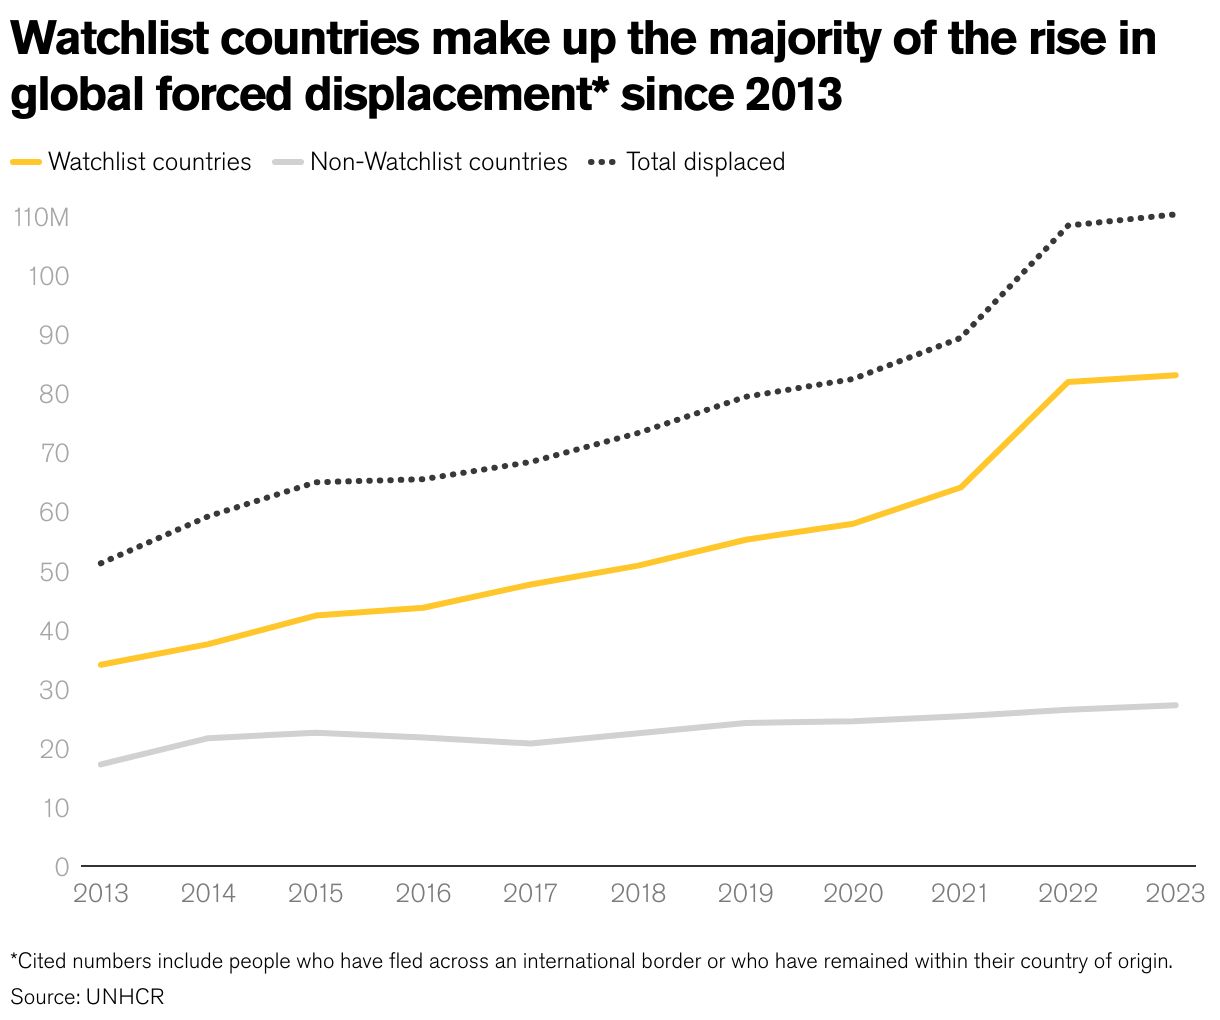 A line graph showing that, between 2013 and 2023, Watchlist countries have accounted for a growing proportion of displaced people, compared to non-Watchlist countries.